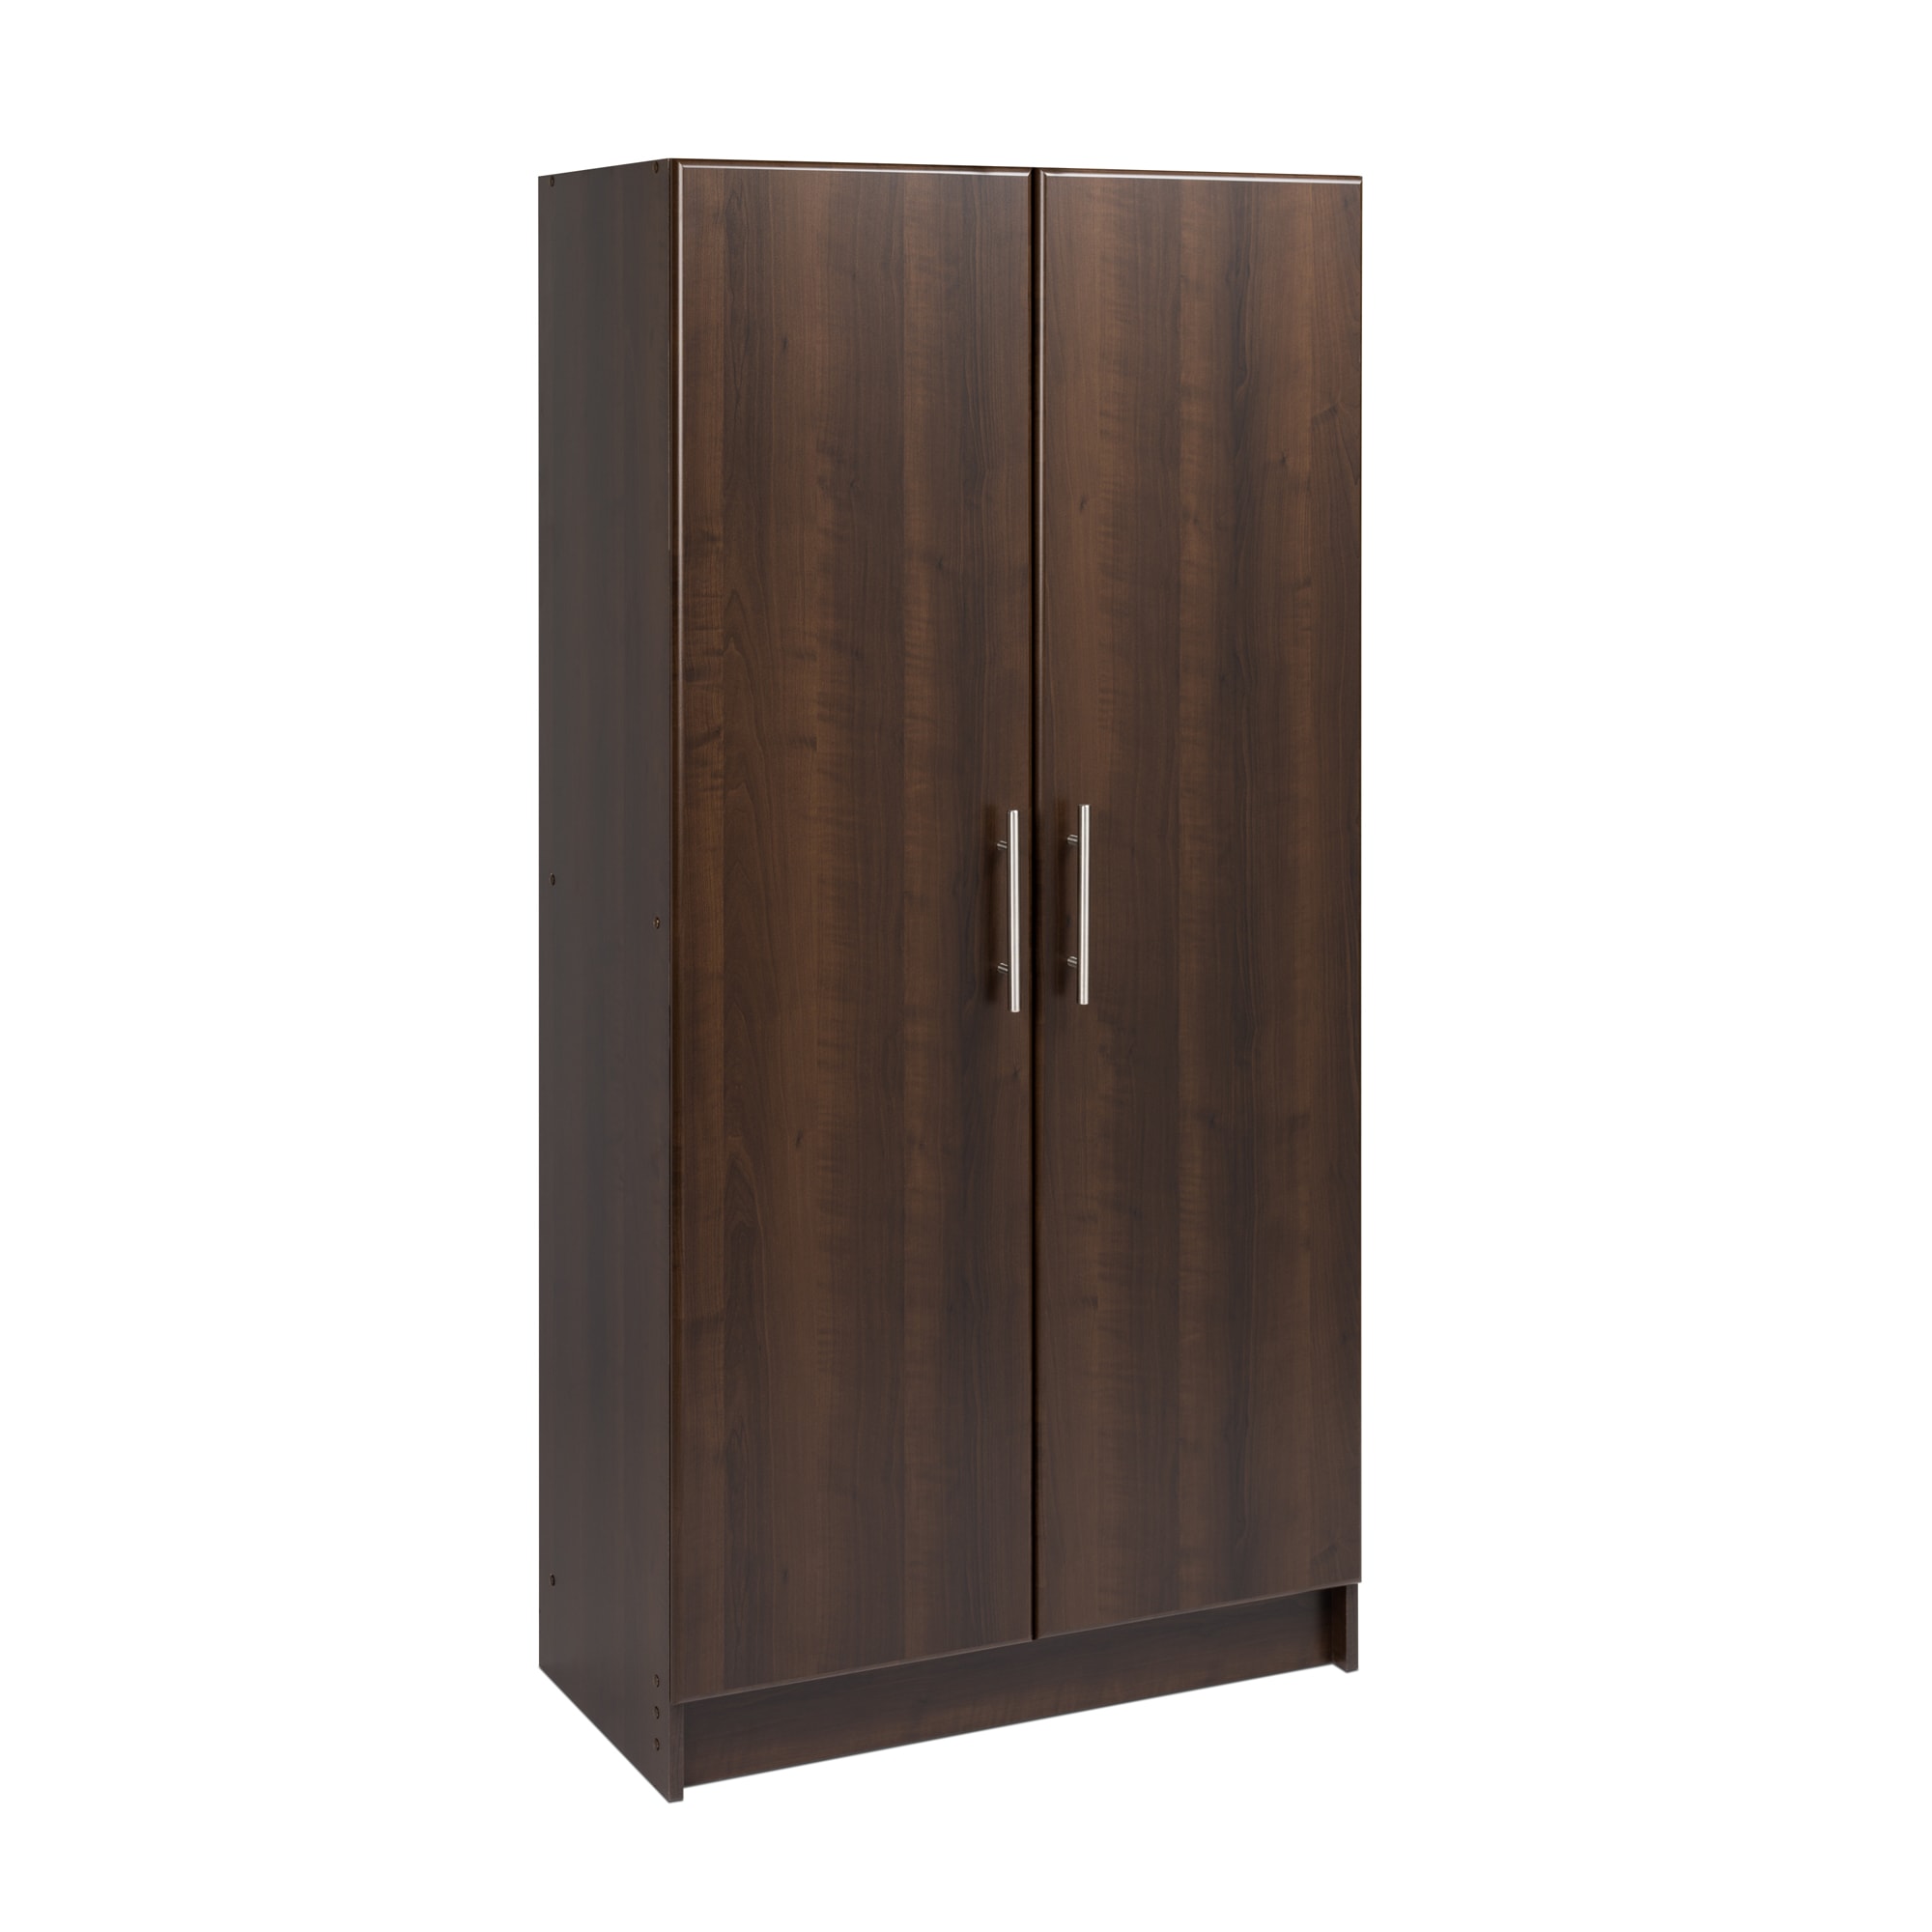 Estate 20.5-in W x 3.625-in H Wood Composite Hardwood Freestanding Utility  Storage Cabinet